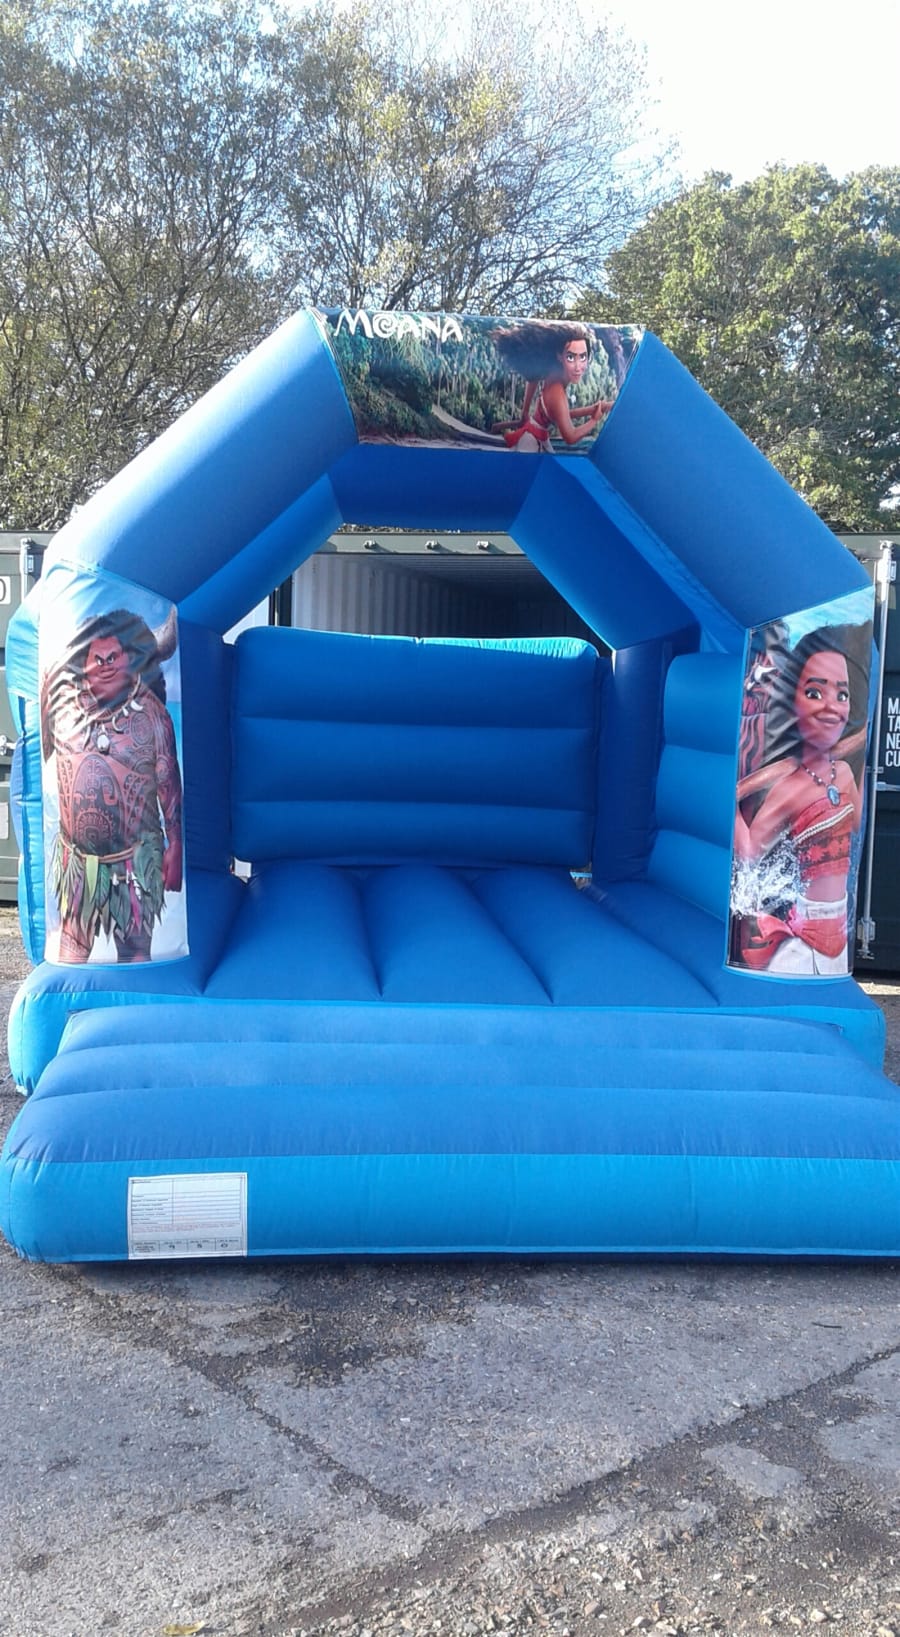 Moana Bouncy Castle 11 X 15ft Bouncy Castle Hire In Totton Hampshire New Forest Southampton Romsey Eastleigh